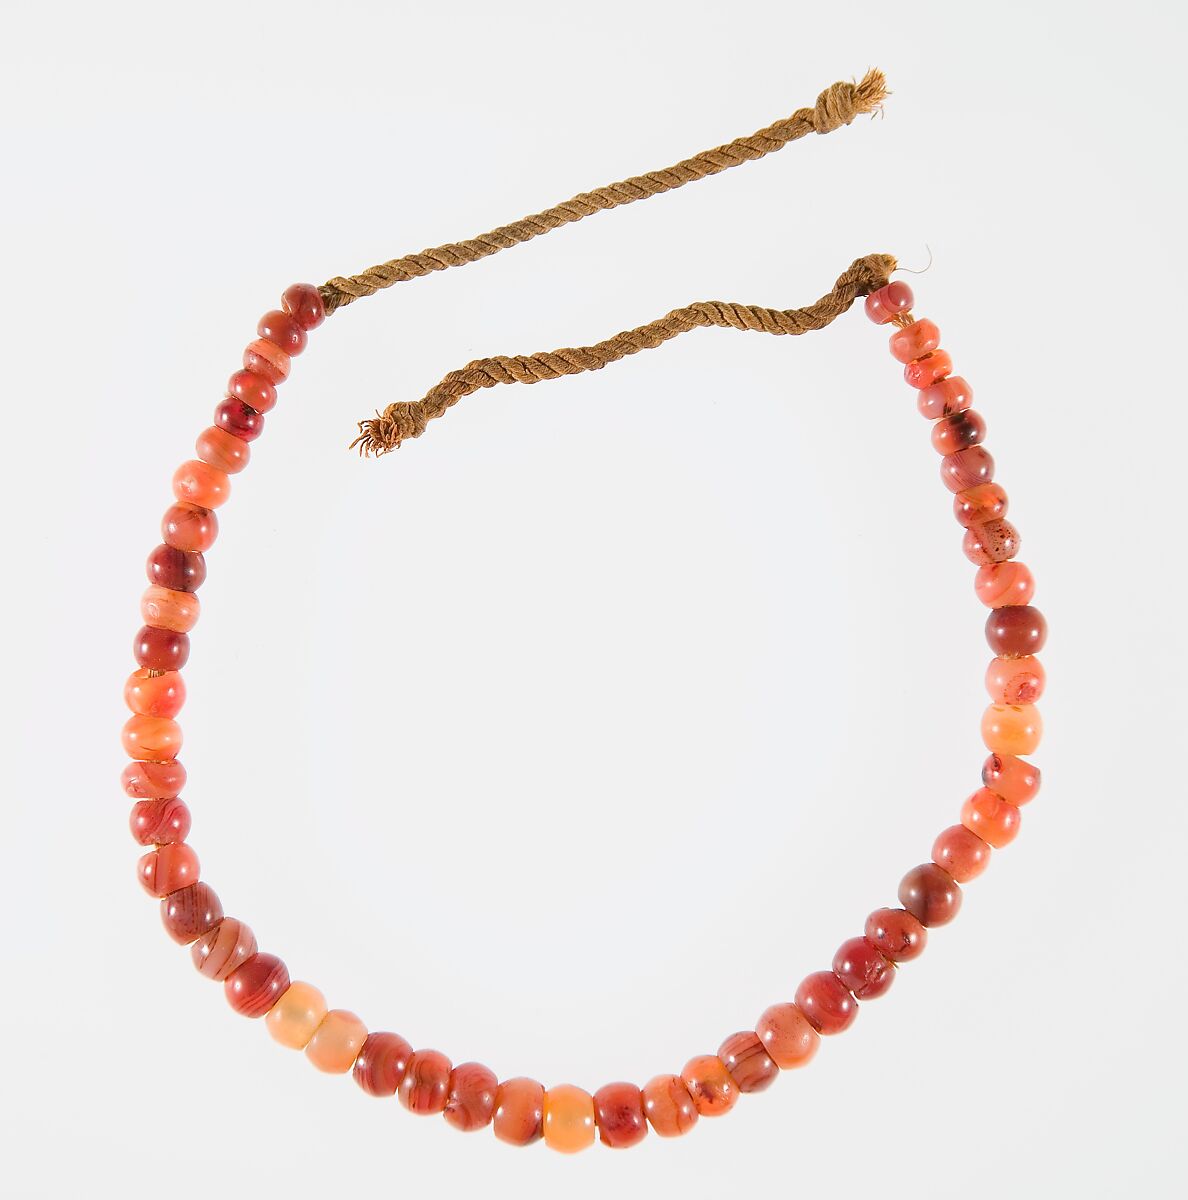 Carnelian Necklace of the Child Myt, Carnelian, twisted linen cord and original string 